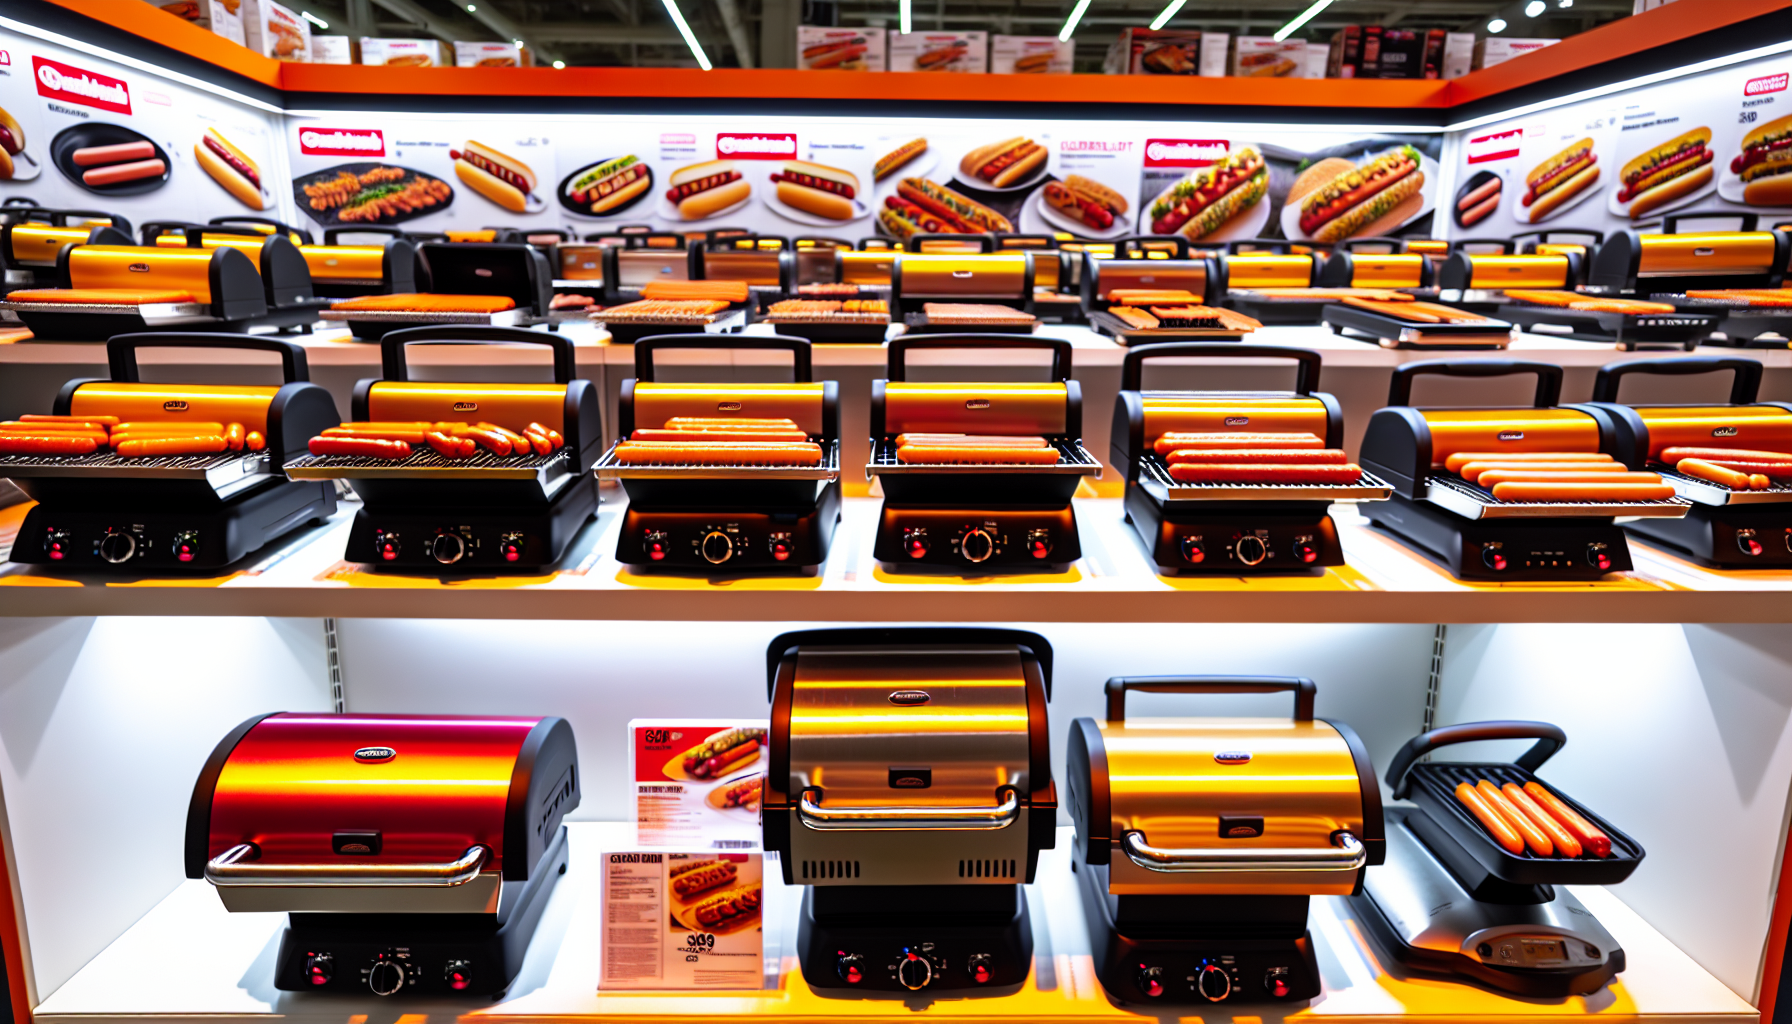 Various hot dog grills on display in a store